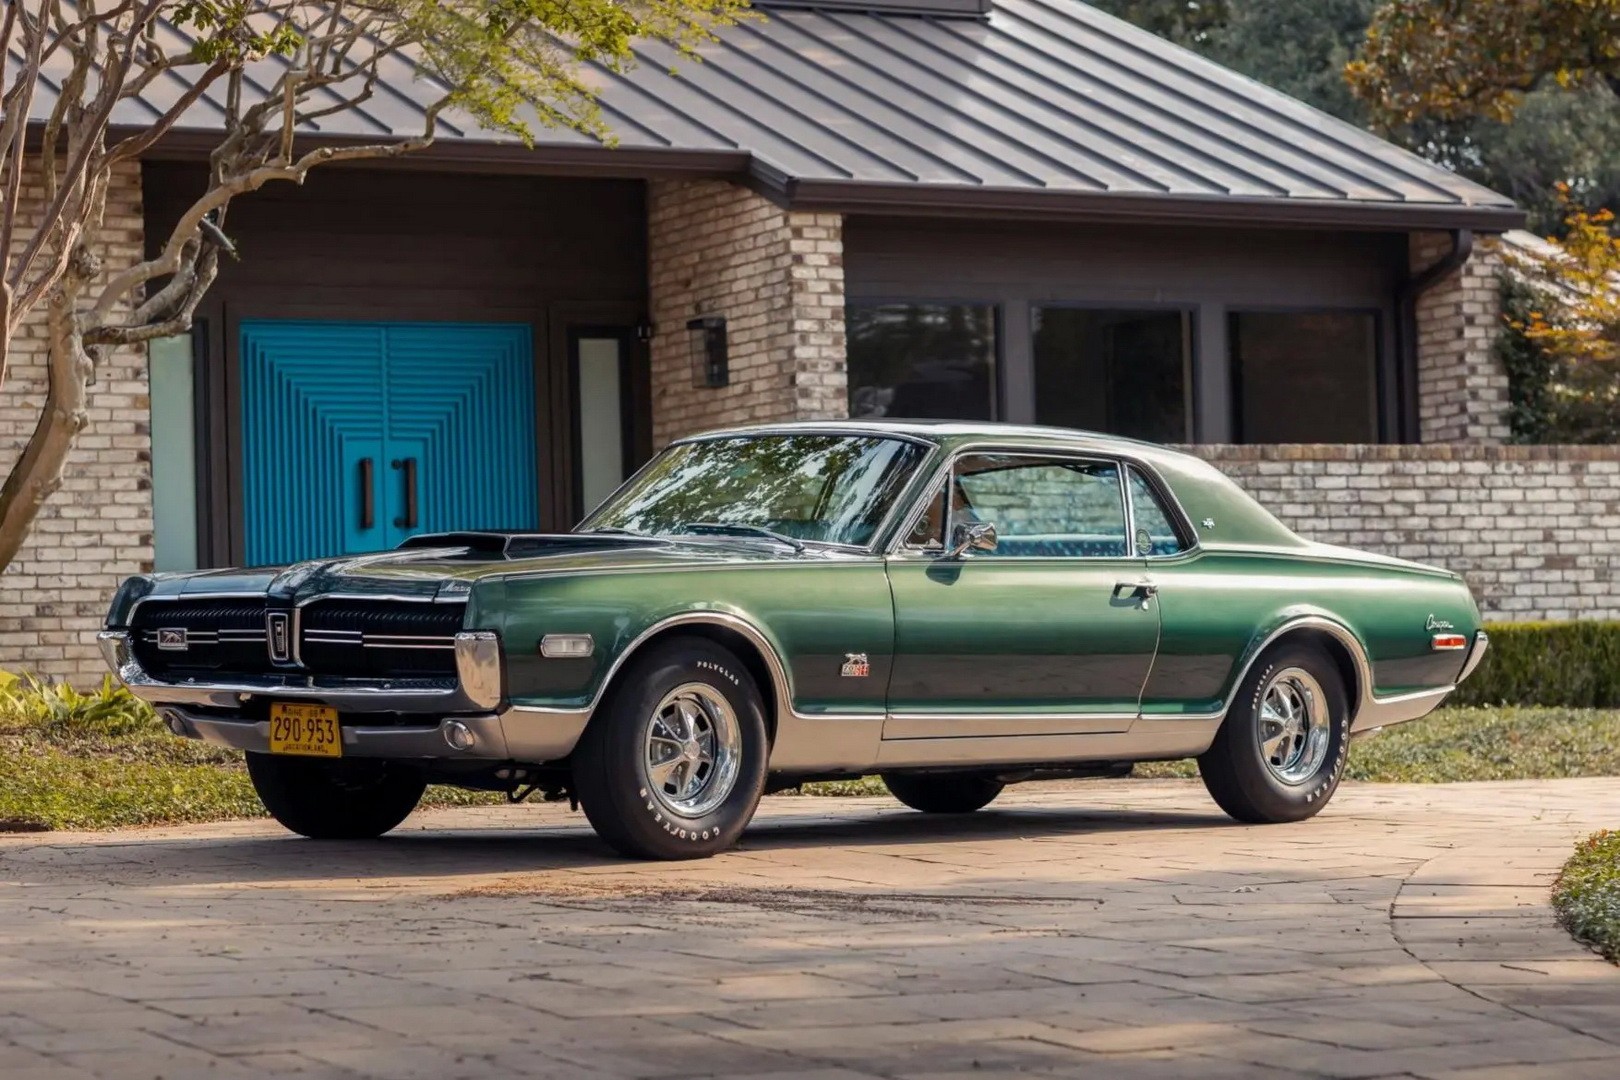 Rare 1968 Mercury Cougar Gt E Xr7 With Cobra Jet V8 Is Now Worth 2022